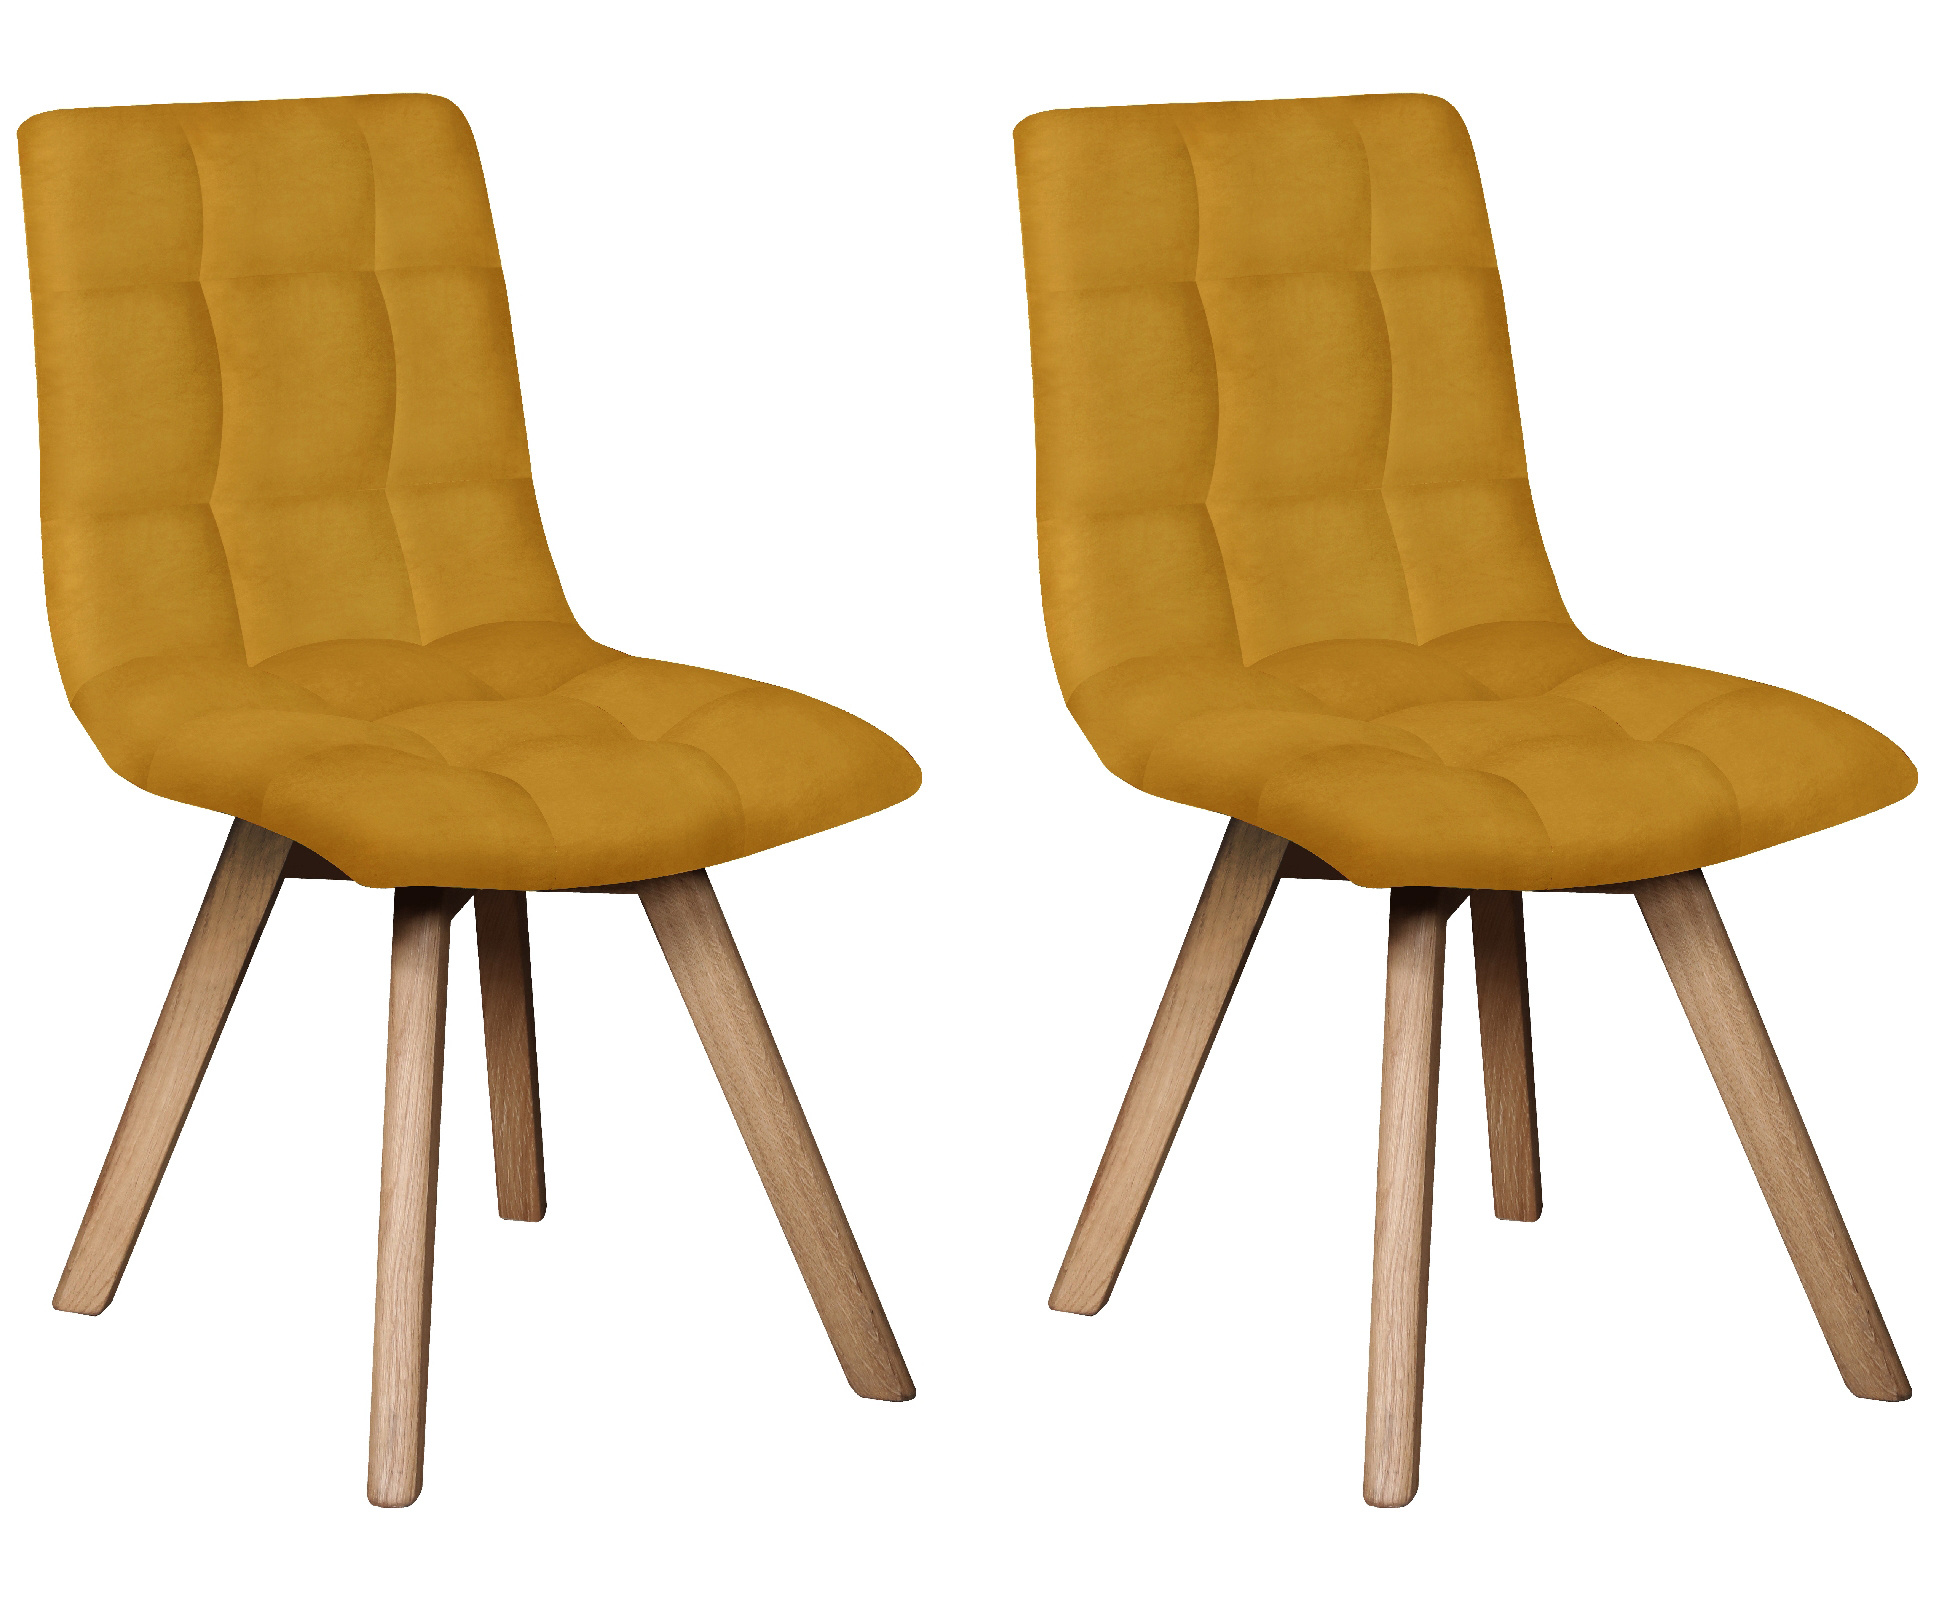 Pair of Carlton Furniture in Dolomite Dining Chairs in Mustard